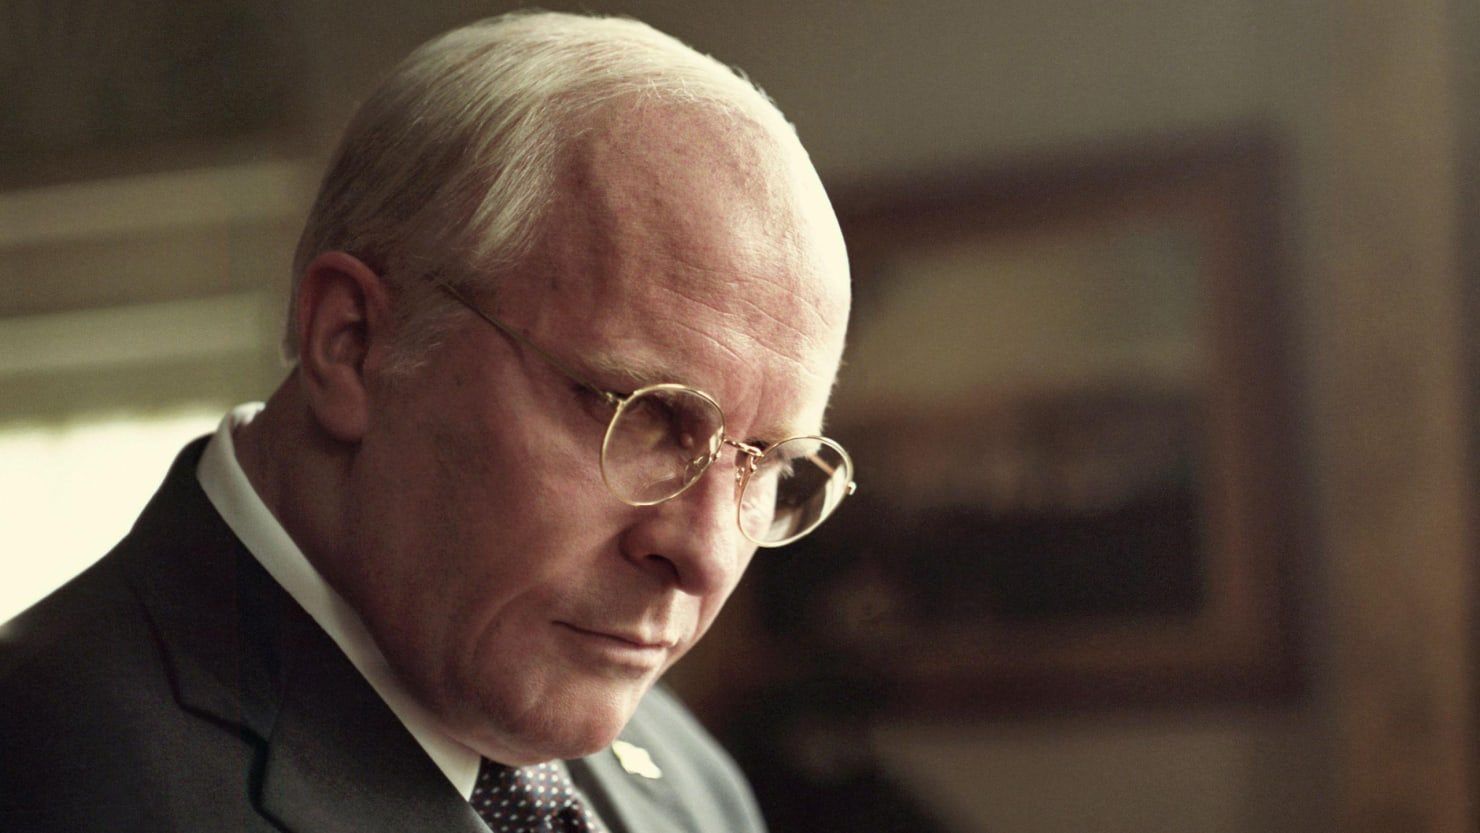 The B. reccomend Dick cheney become first high level